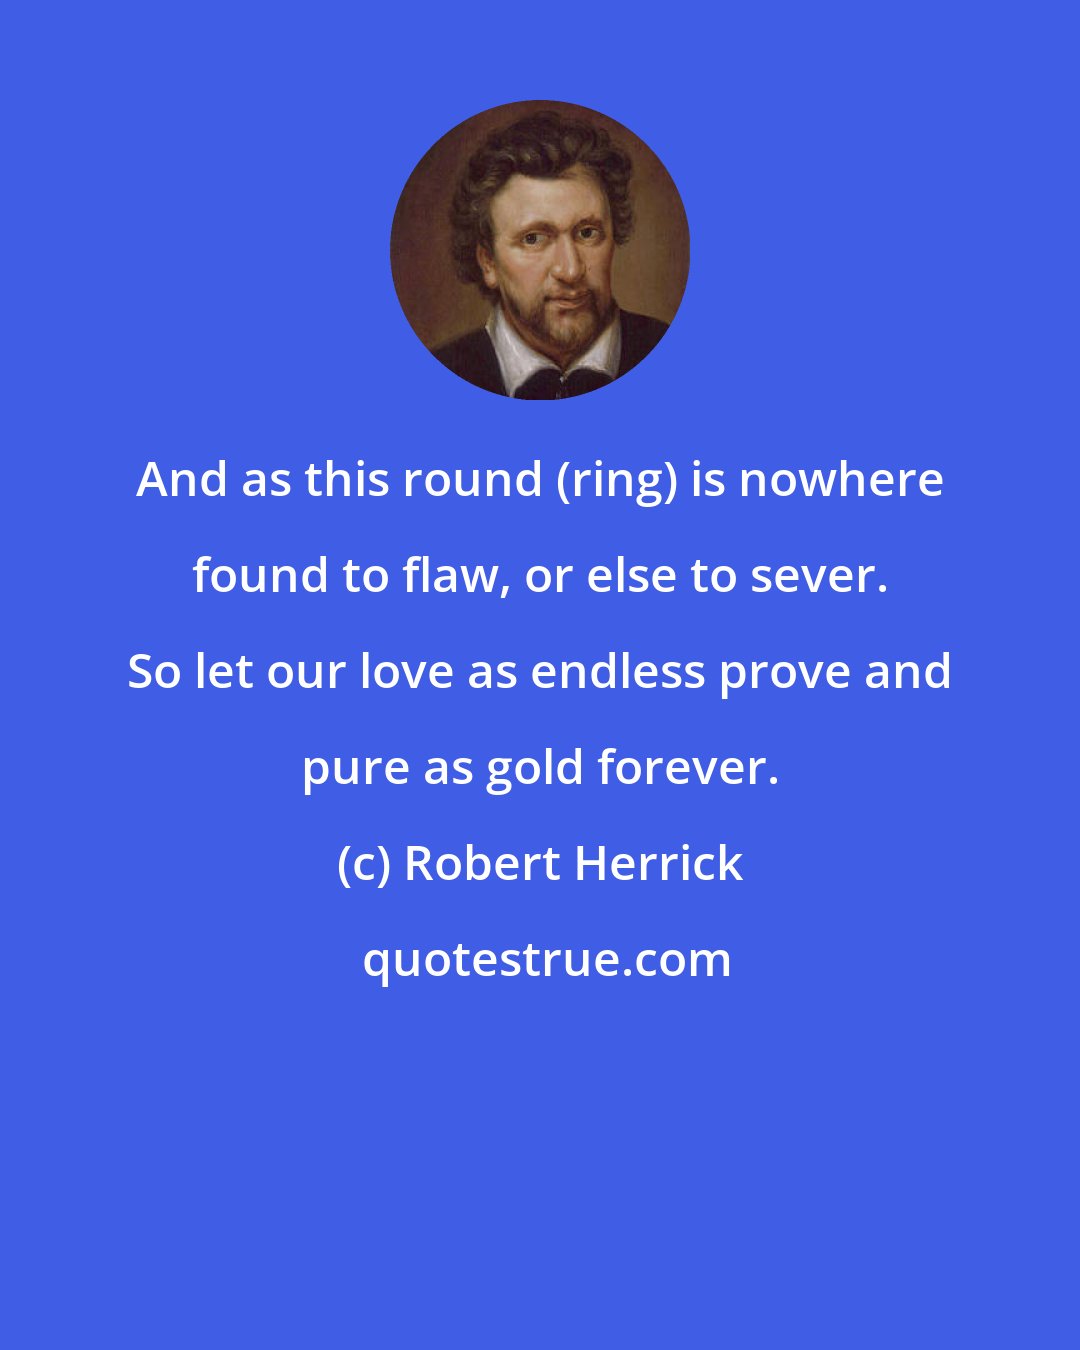 Robert Herrick: And as this round (ring) is nowhere found to flaw, or else to sever. So let our love as endless prove and pure as gold forever.